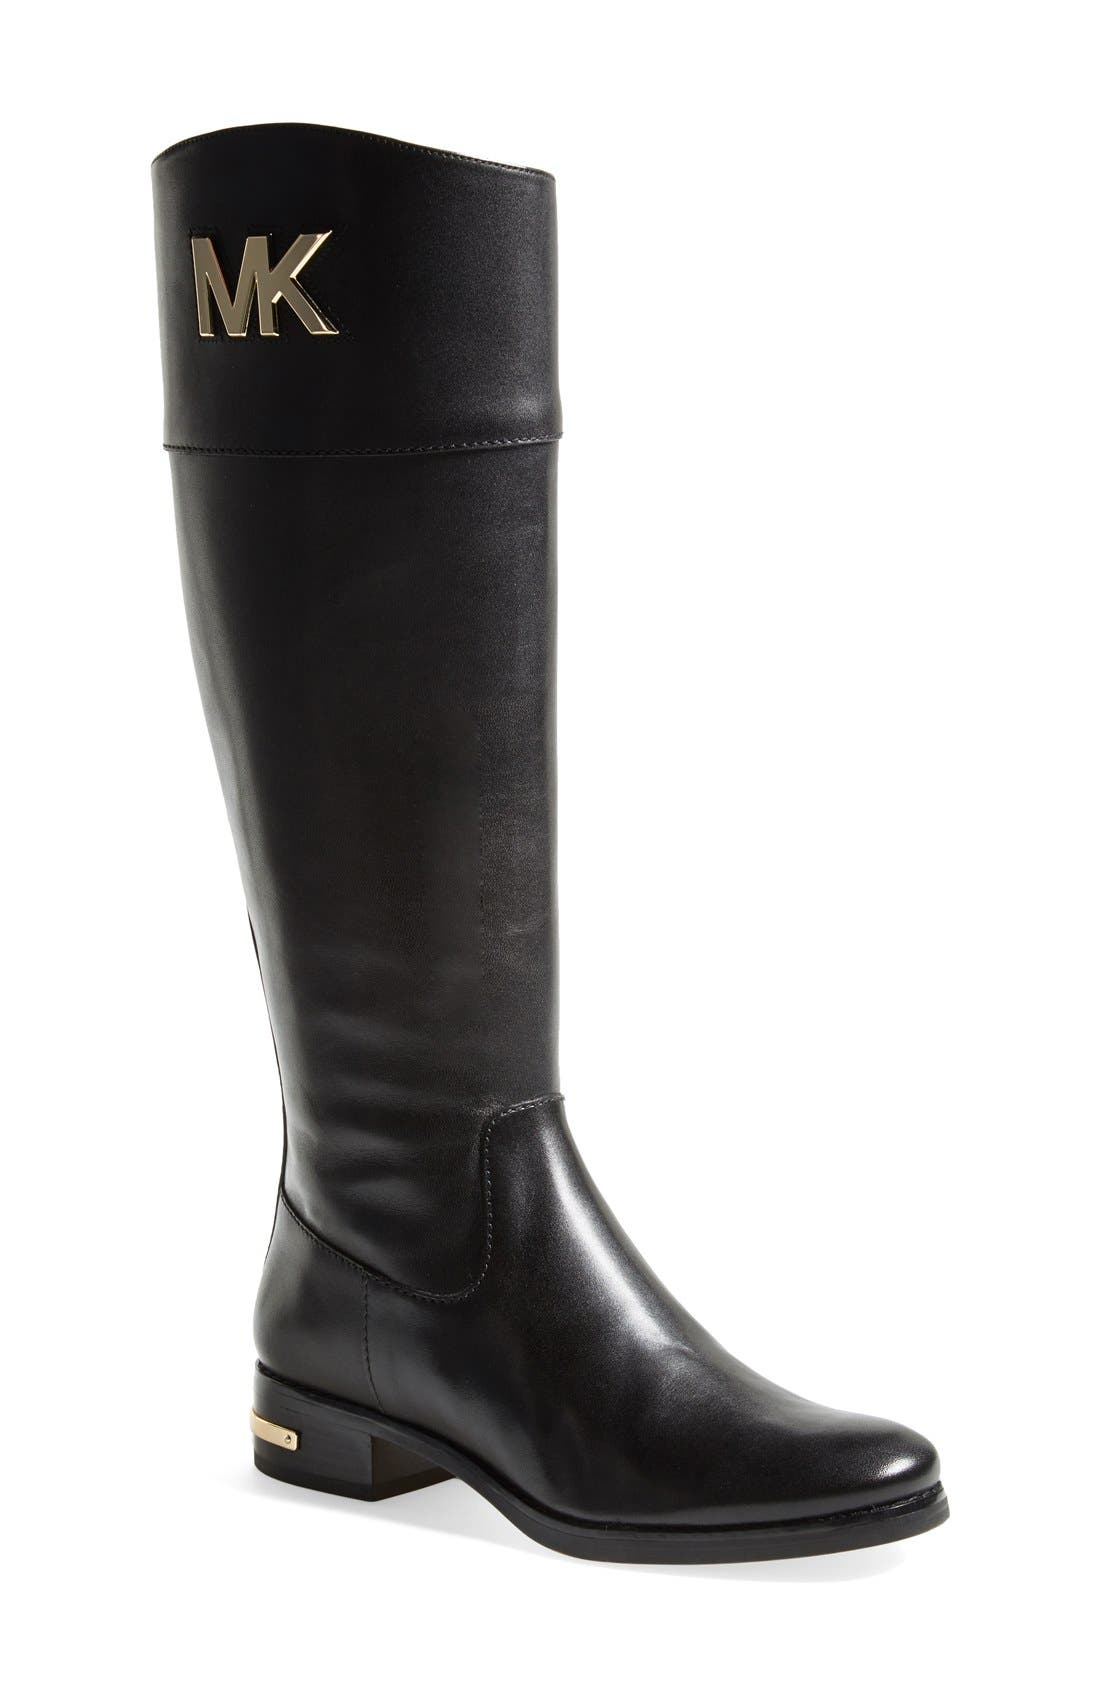 mk leather boots